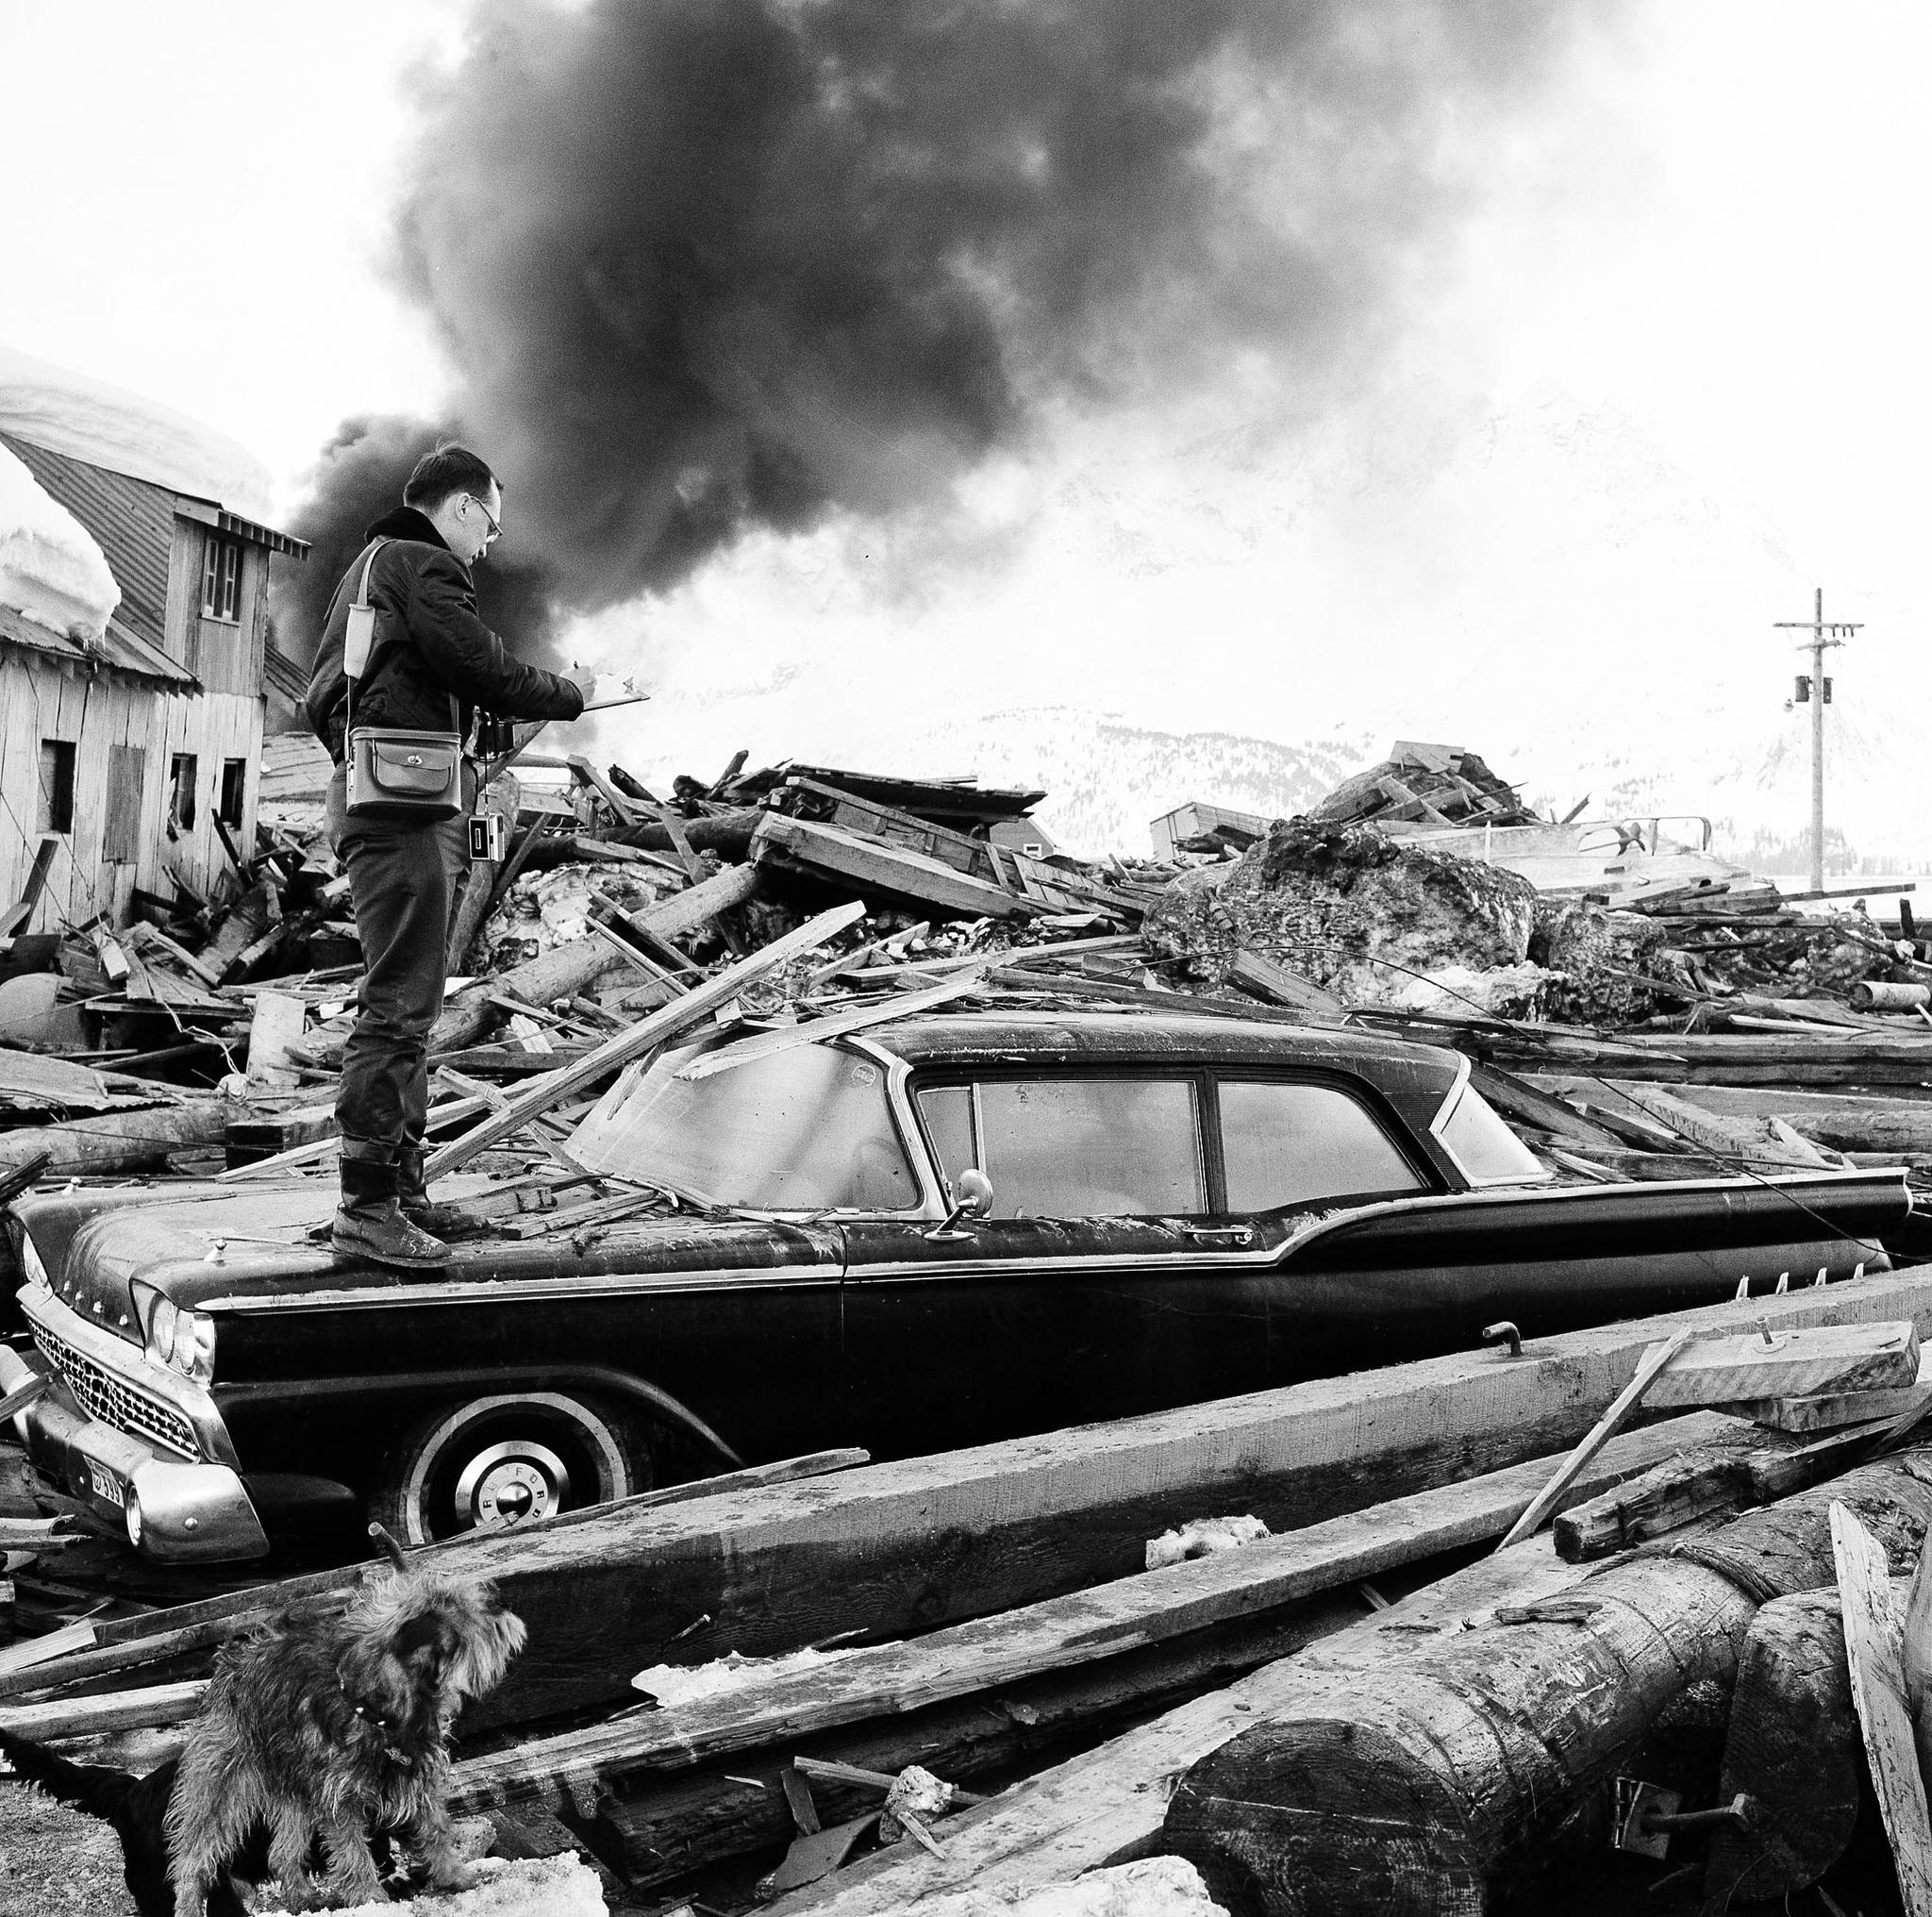 In this March 29, 1964 file photo, a photographer looks over wreckage as smoke rises in the background from burning oil storage tanks at Valdez on March 29, 1964. The city was hit hard by the earthquake that demolished some of Alaska’s most picturesque and largest cities. North America’s largest earthquake rattled Alaska 54 years ago, killing 15 people and creating a tsunami that killed 124 more from Alaska to California. The magnitude 9.2 quake hit at 5:30 p.m. on Good Friday, turning soil beneath parts of Anchorage into jelly and collapsing buildings that were not engineered to withstand the force of colliding continental plates. (Associated Press file)